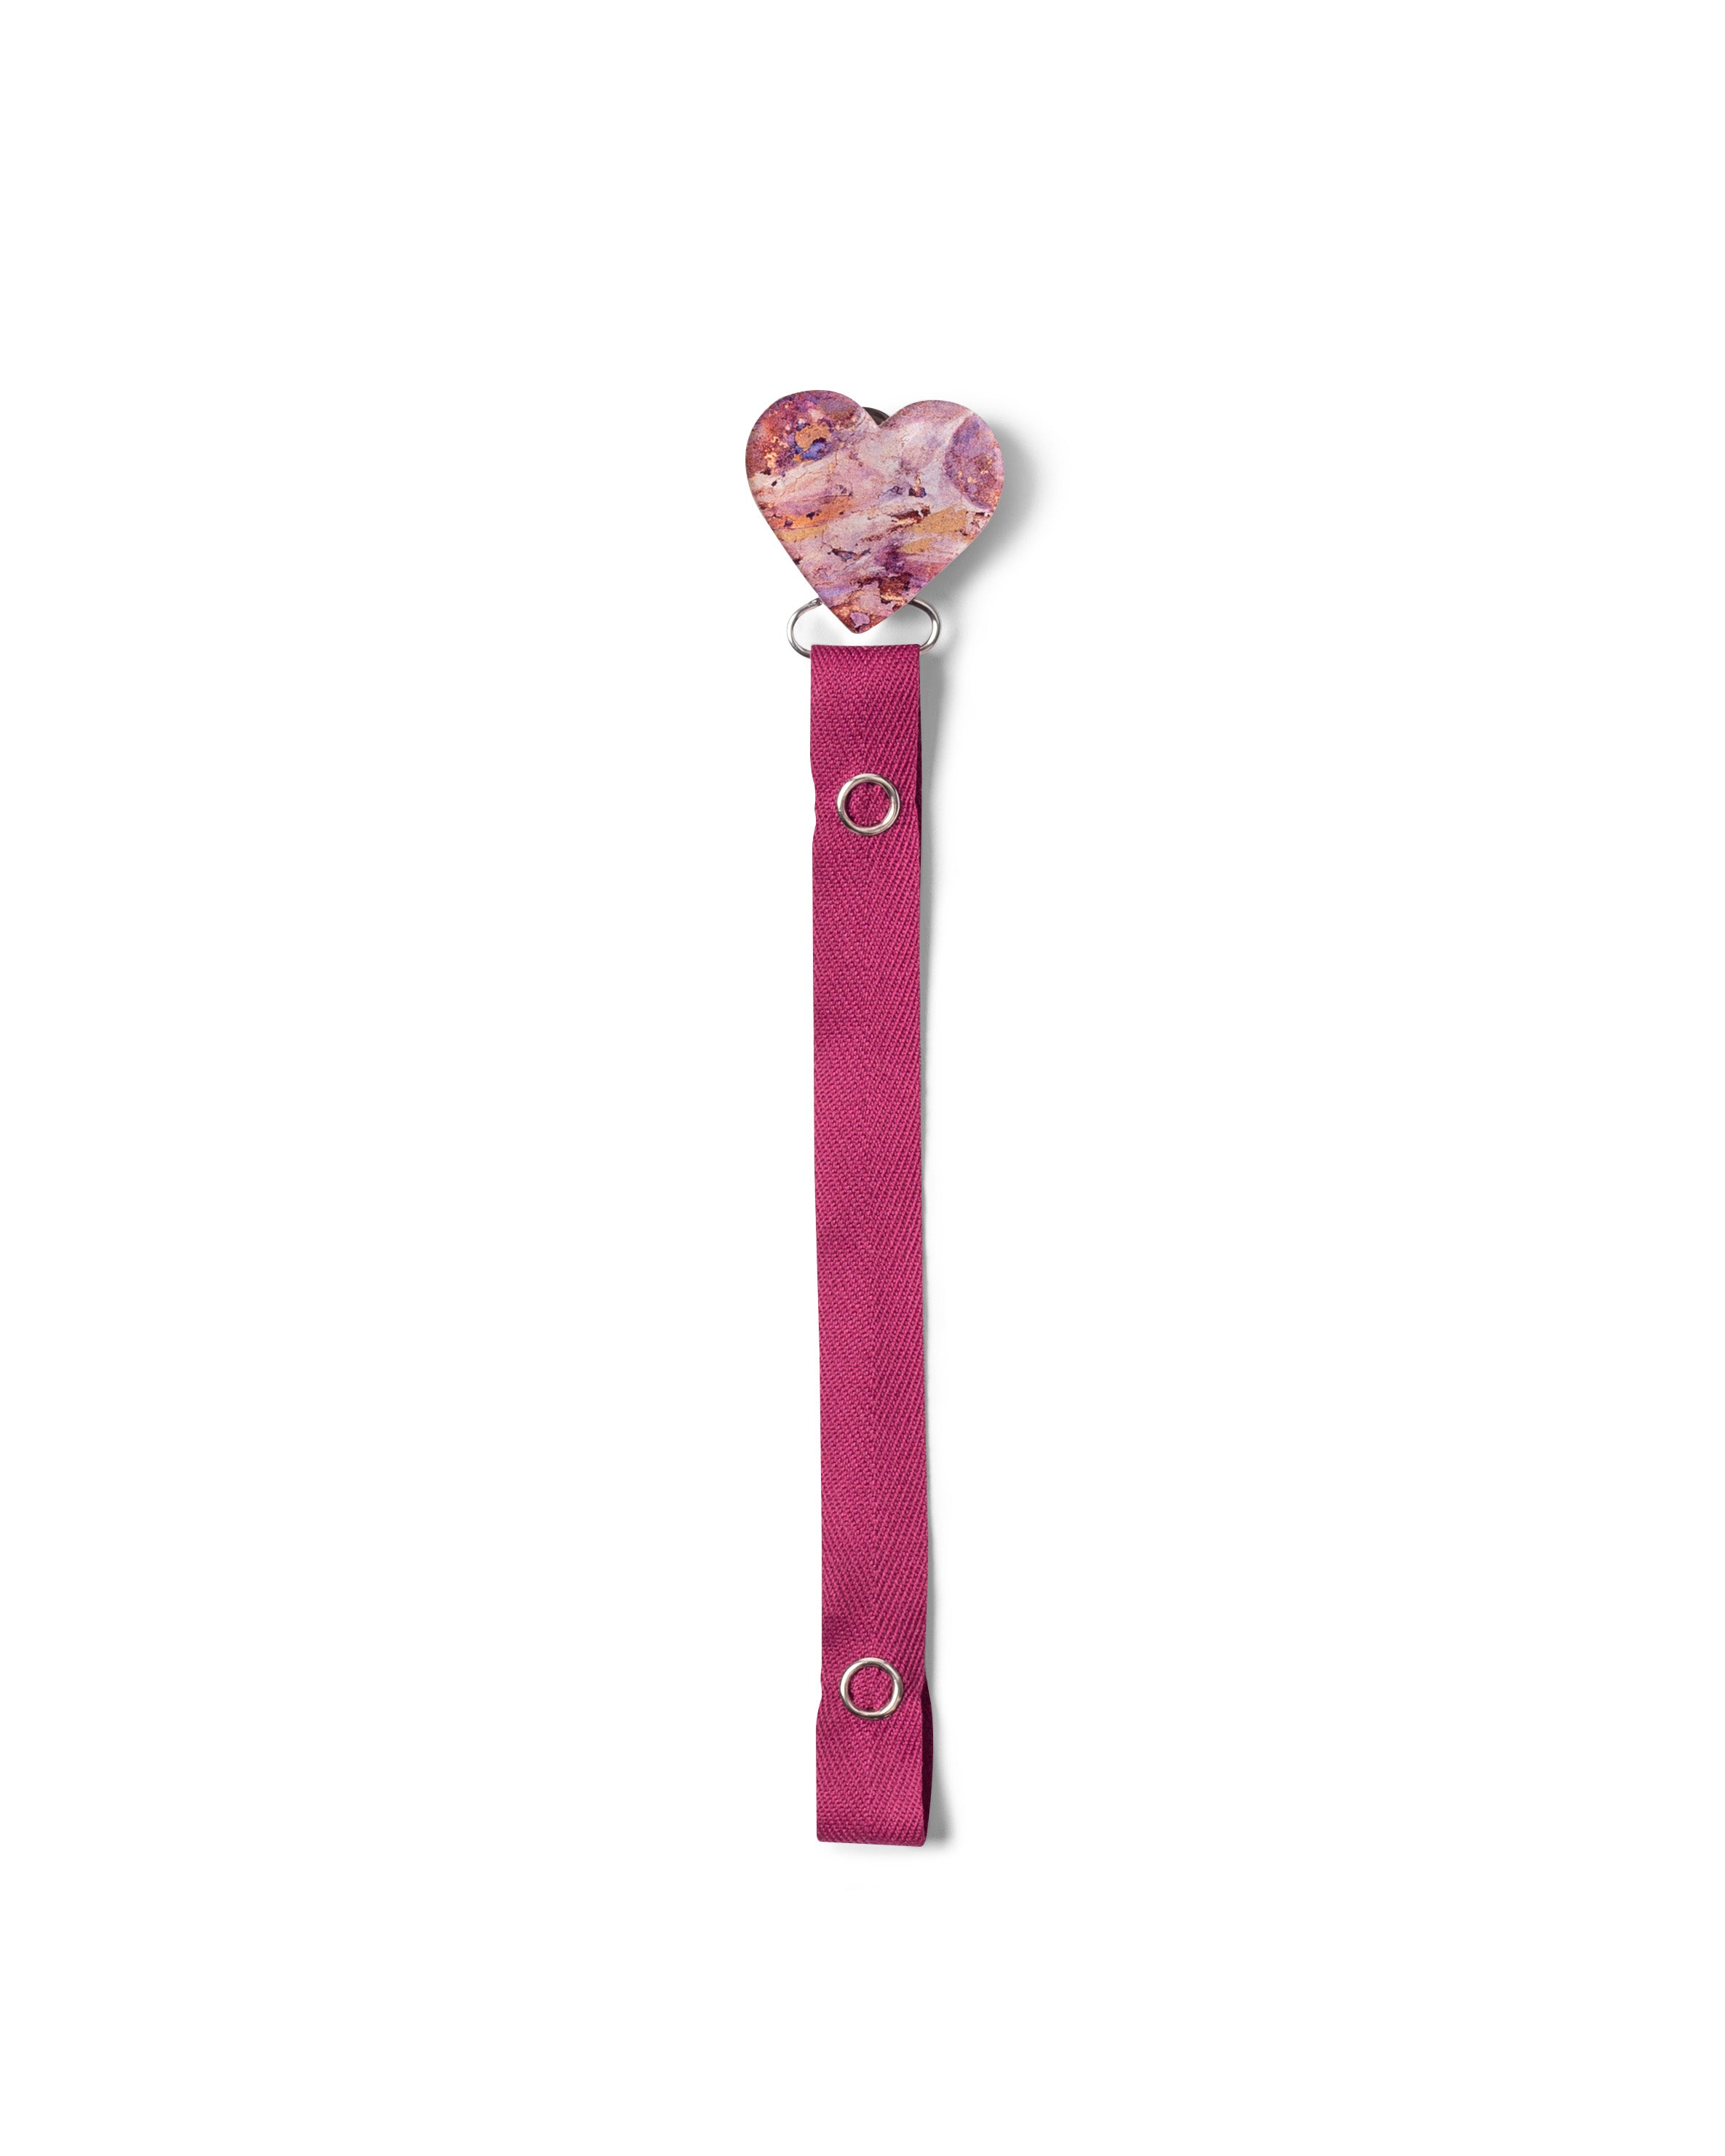 Classy Paci Painted look hearts pinks/ wine/ mauve baby girl pacifier clip Friggs, Bibs Gift Set